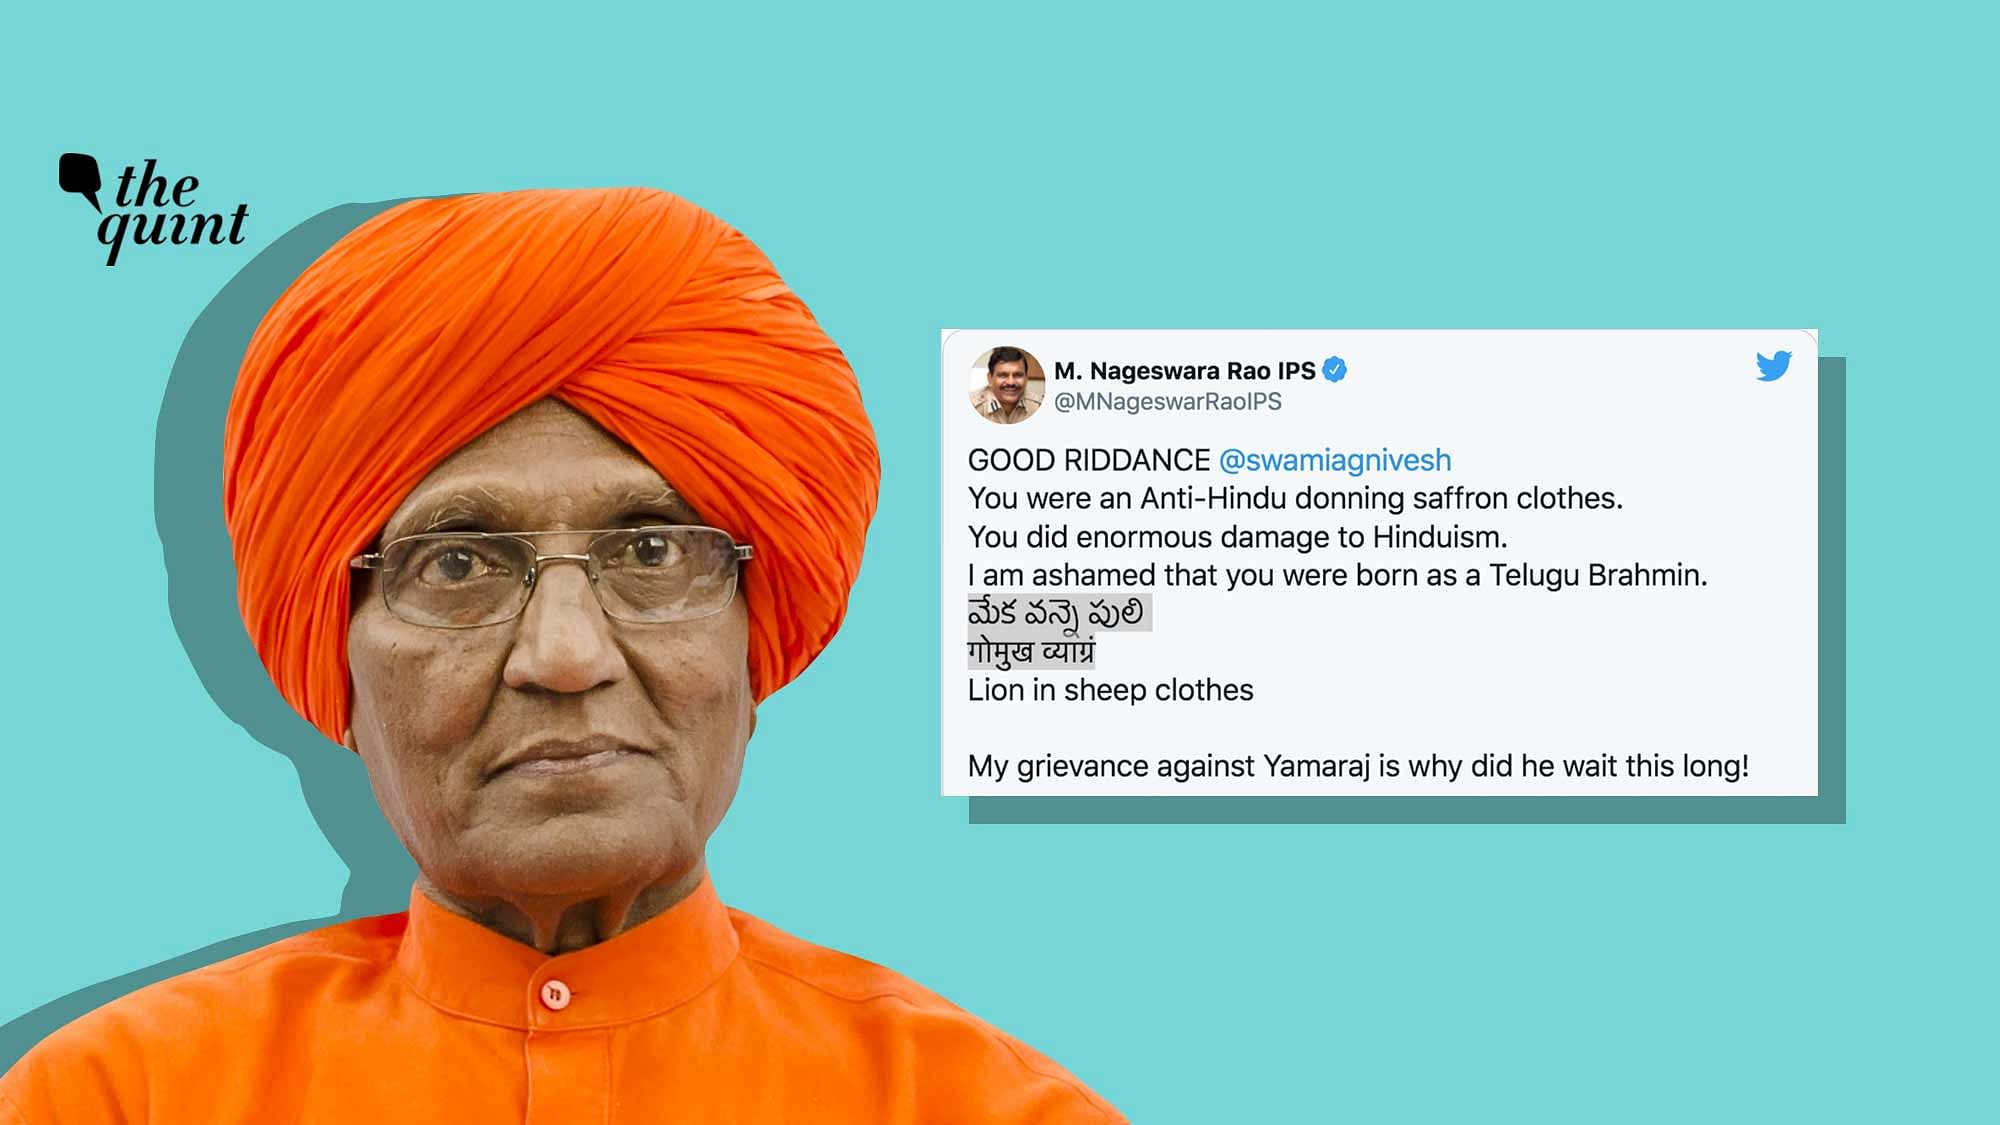 Ex-CBI Chief M Nageswara Rao tweeted derogatory remarks against Swami Agnivesh after the latter’s death on 11 September. This has drawn flak from several quarters.